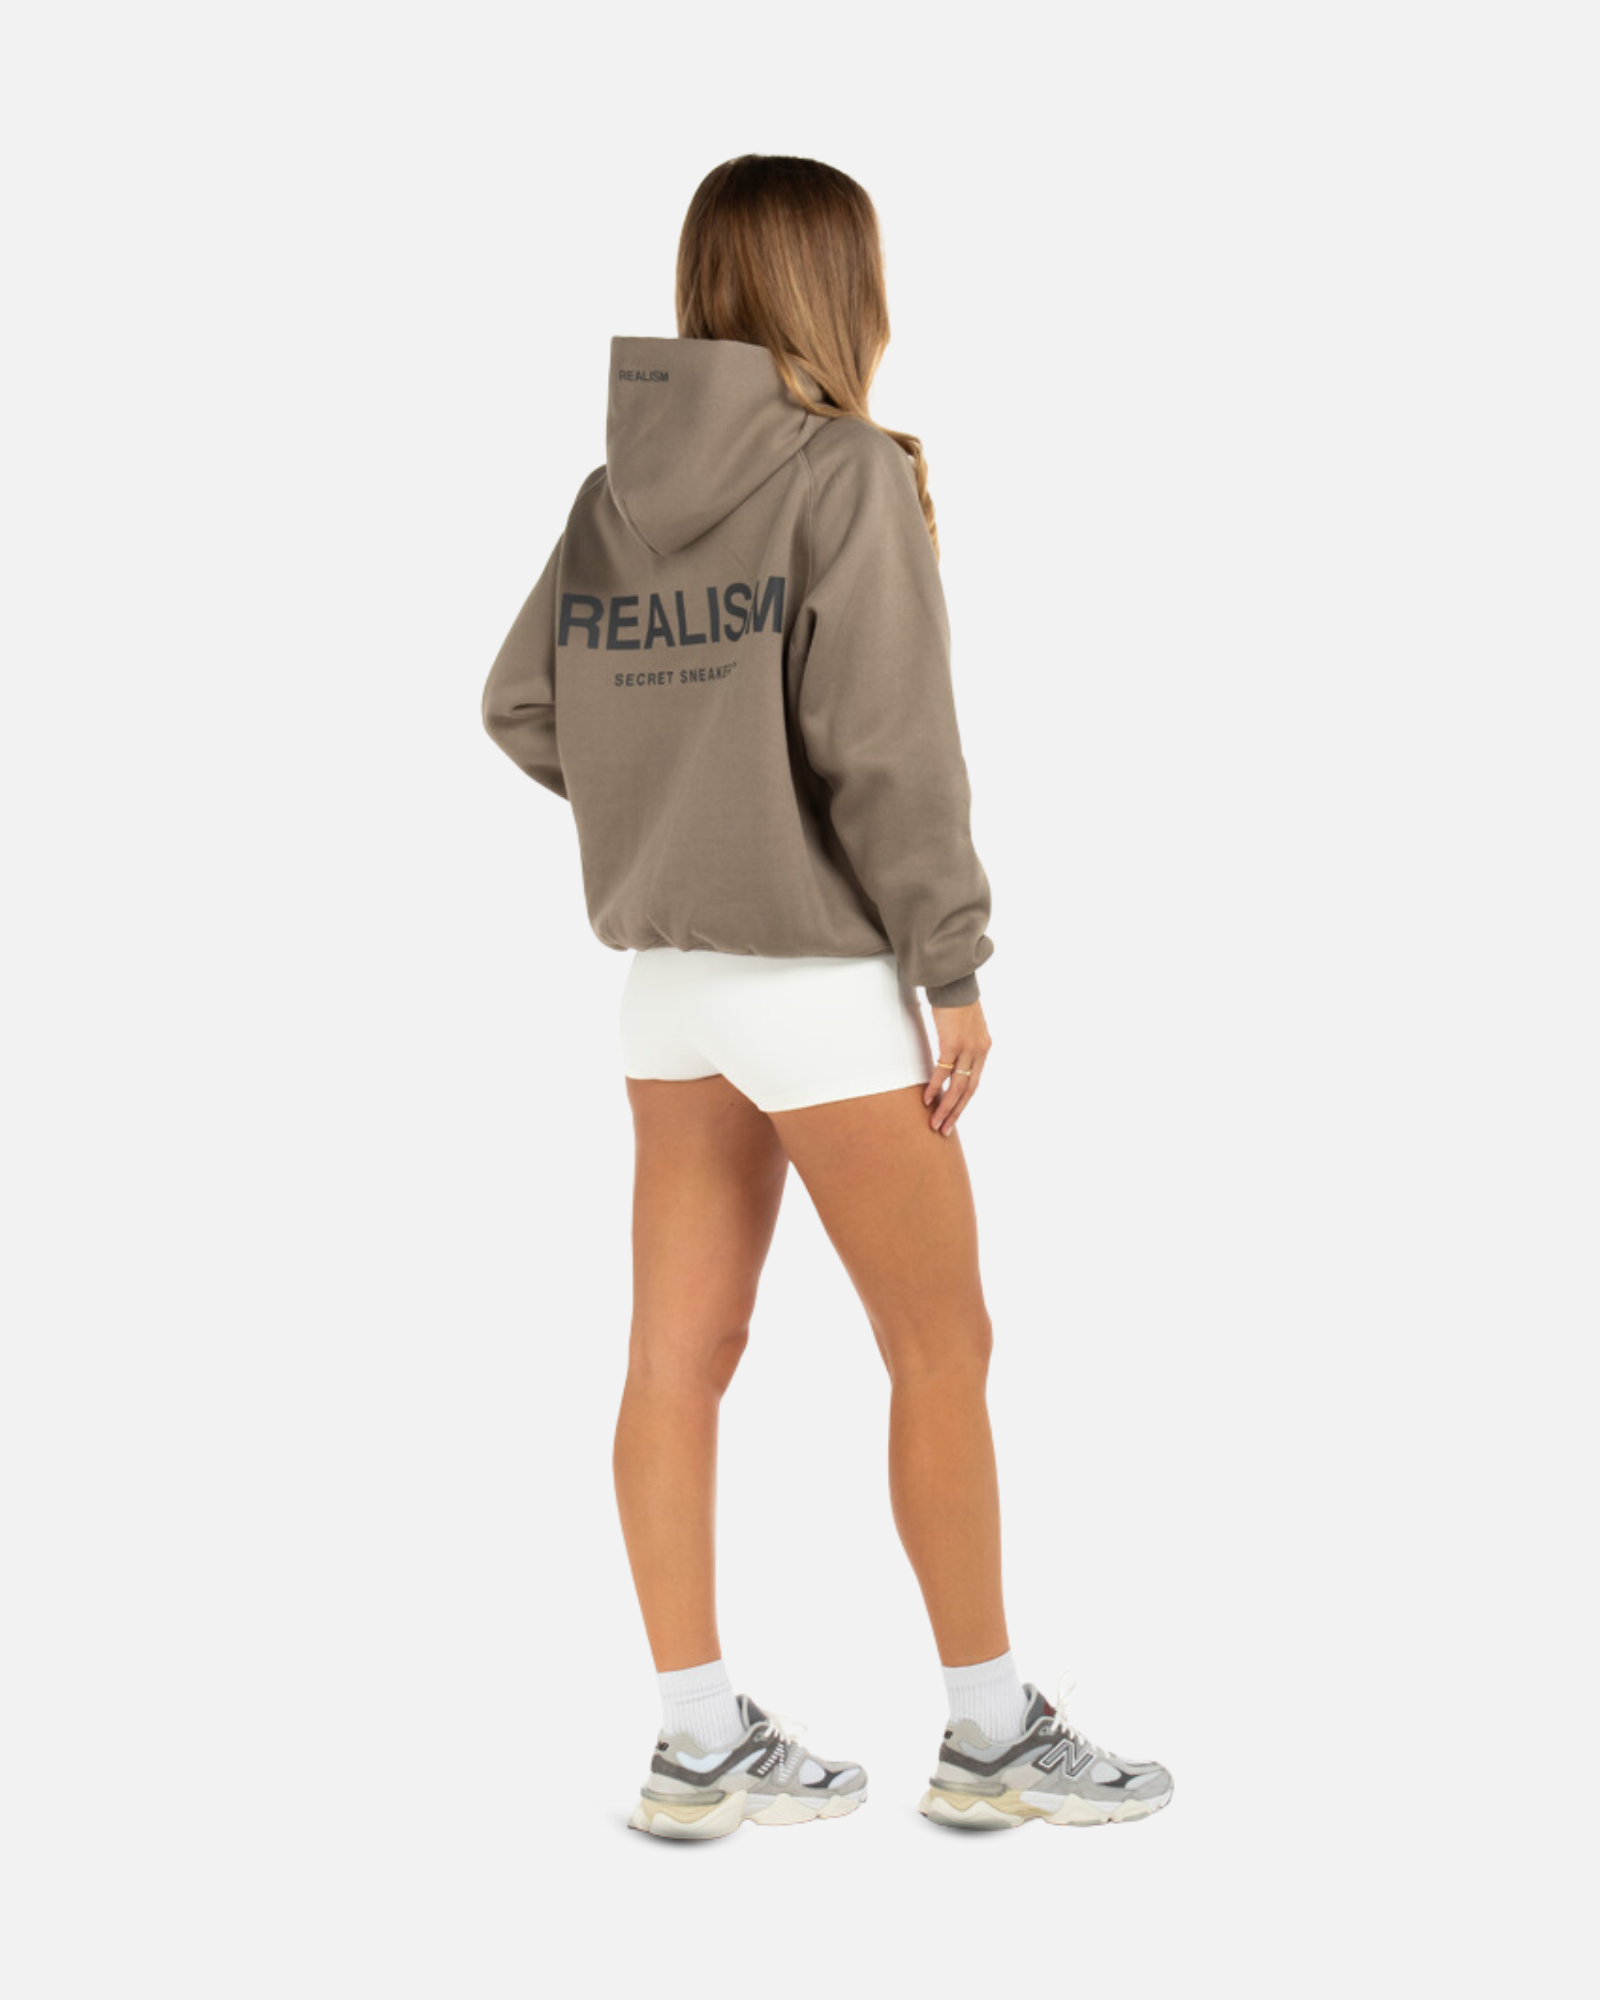 SSS REALISM BACK LOGO REFLECTIVE HOODIE CEMENT